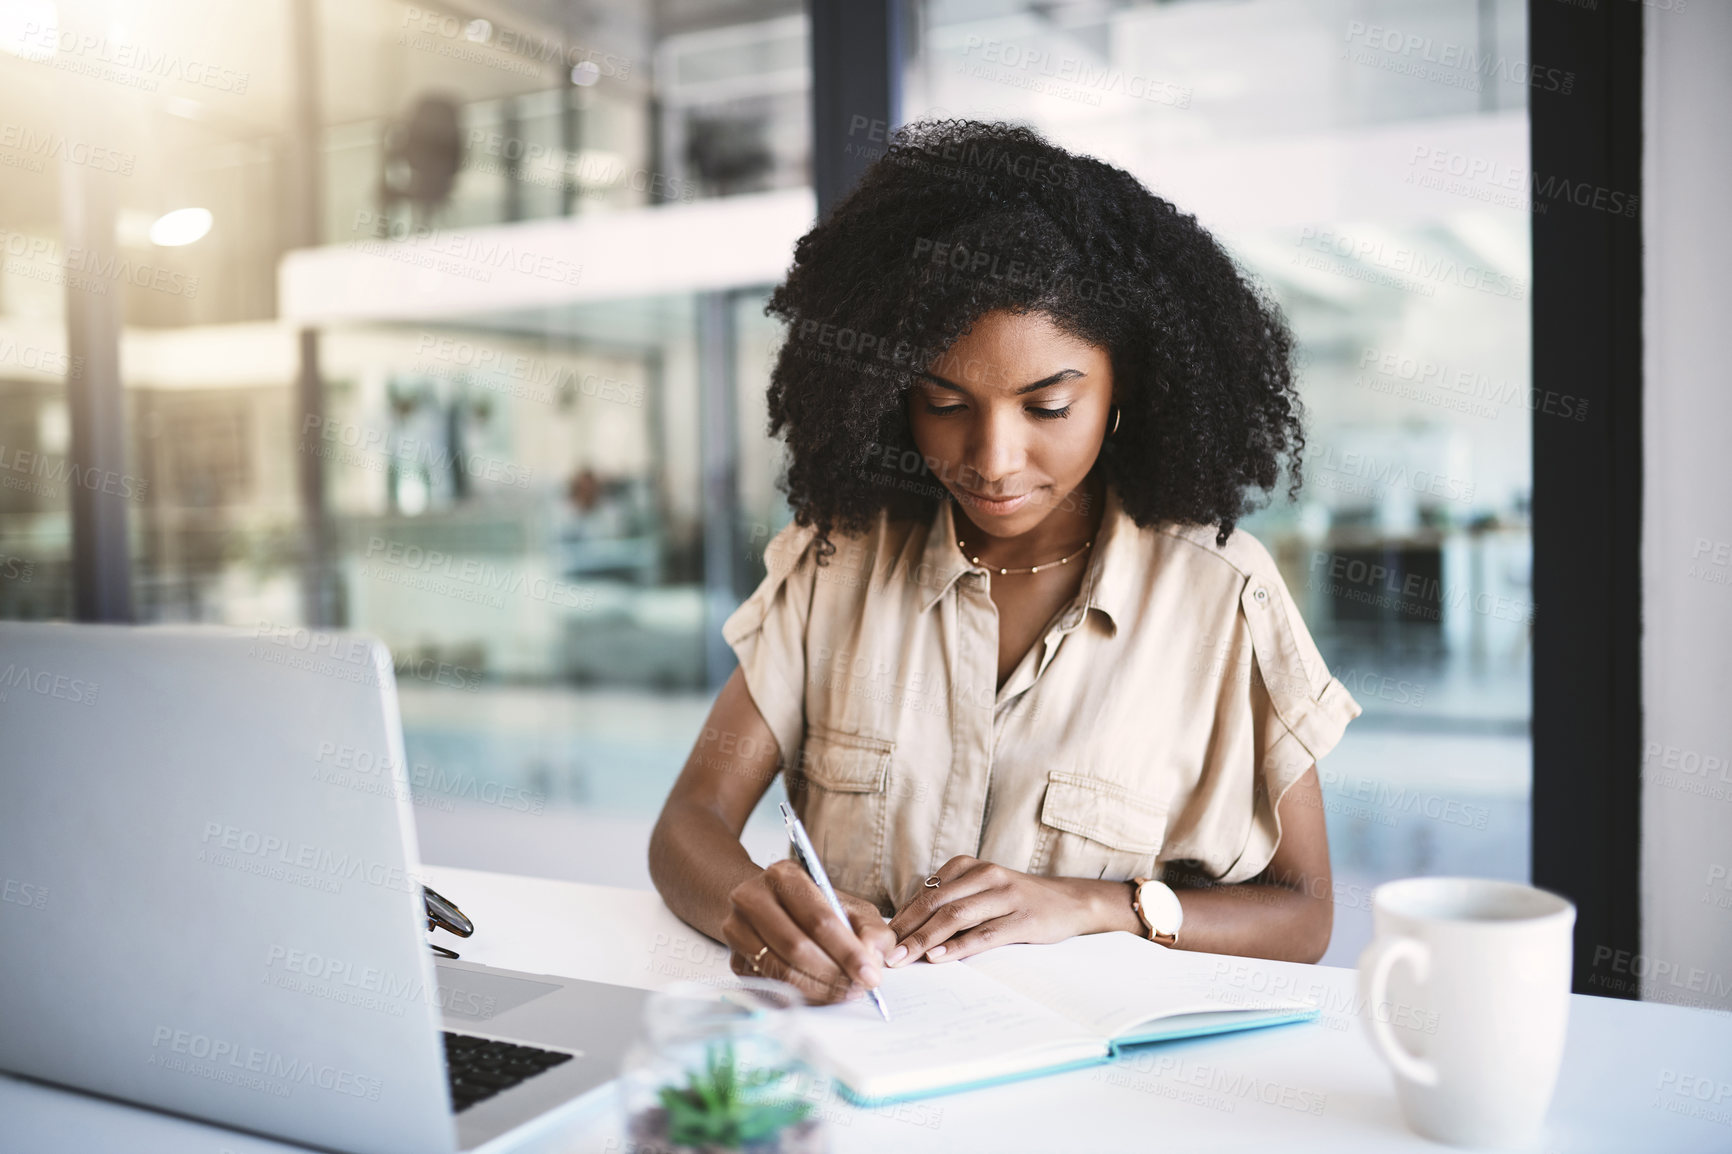 Buy stock photo Shot of a young businesswoman writing notes at her desk in a modern office